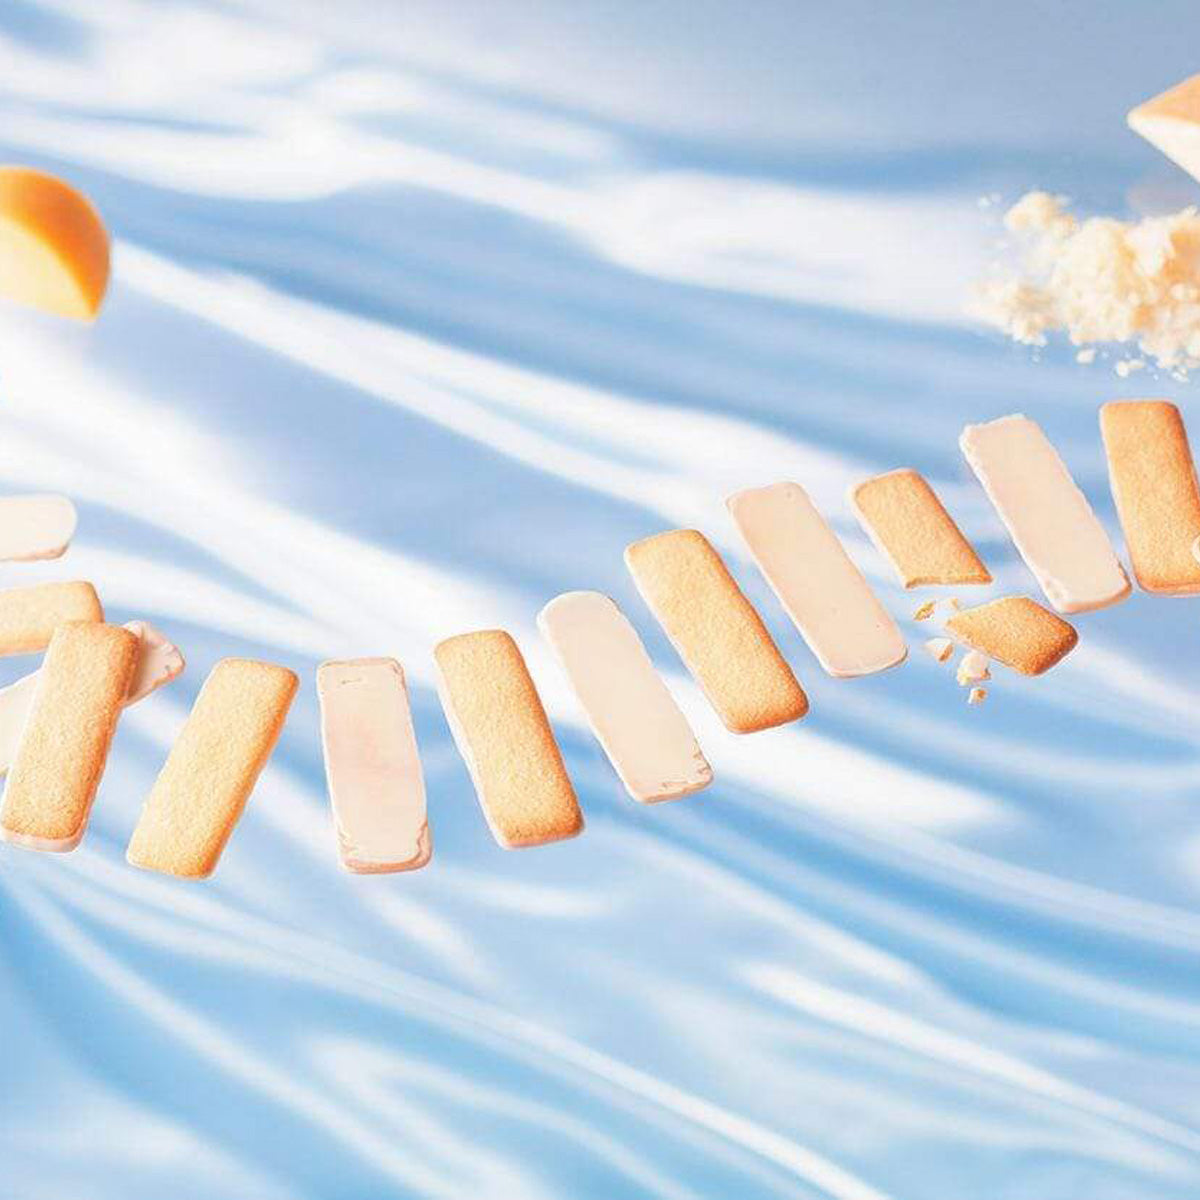 ROYCE' Chocolate - Baton Cookies "Fromage (25 Pcs)" -  Image shows golden cookies coated with white chocolate.  Accents include crumbs and blocks of yellow cheese. Background is in blue.